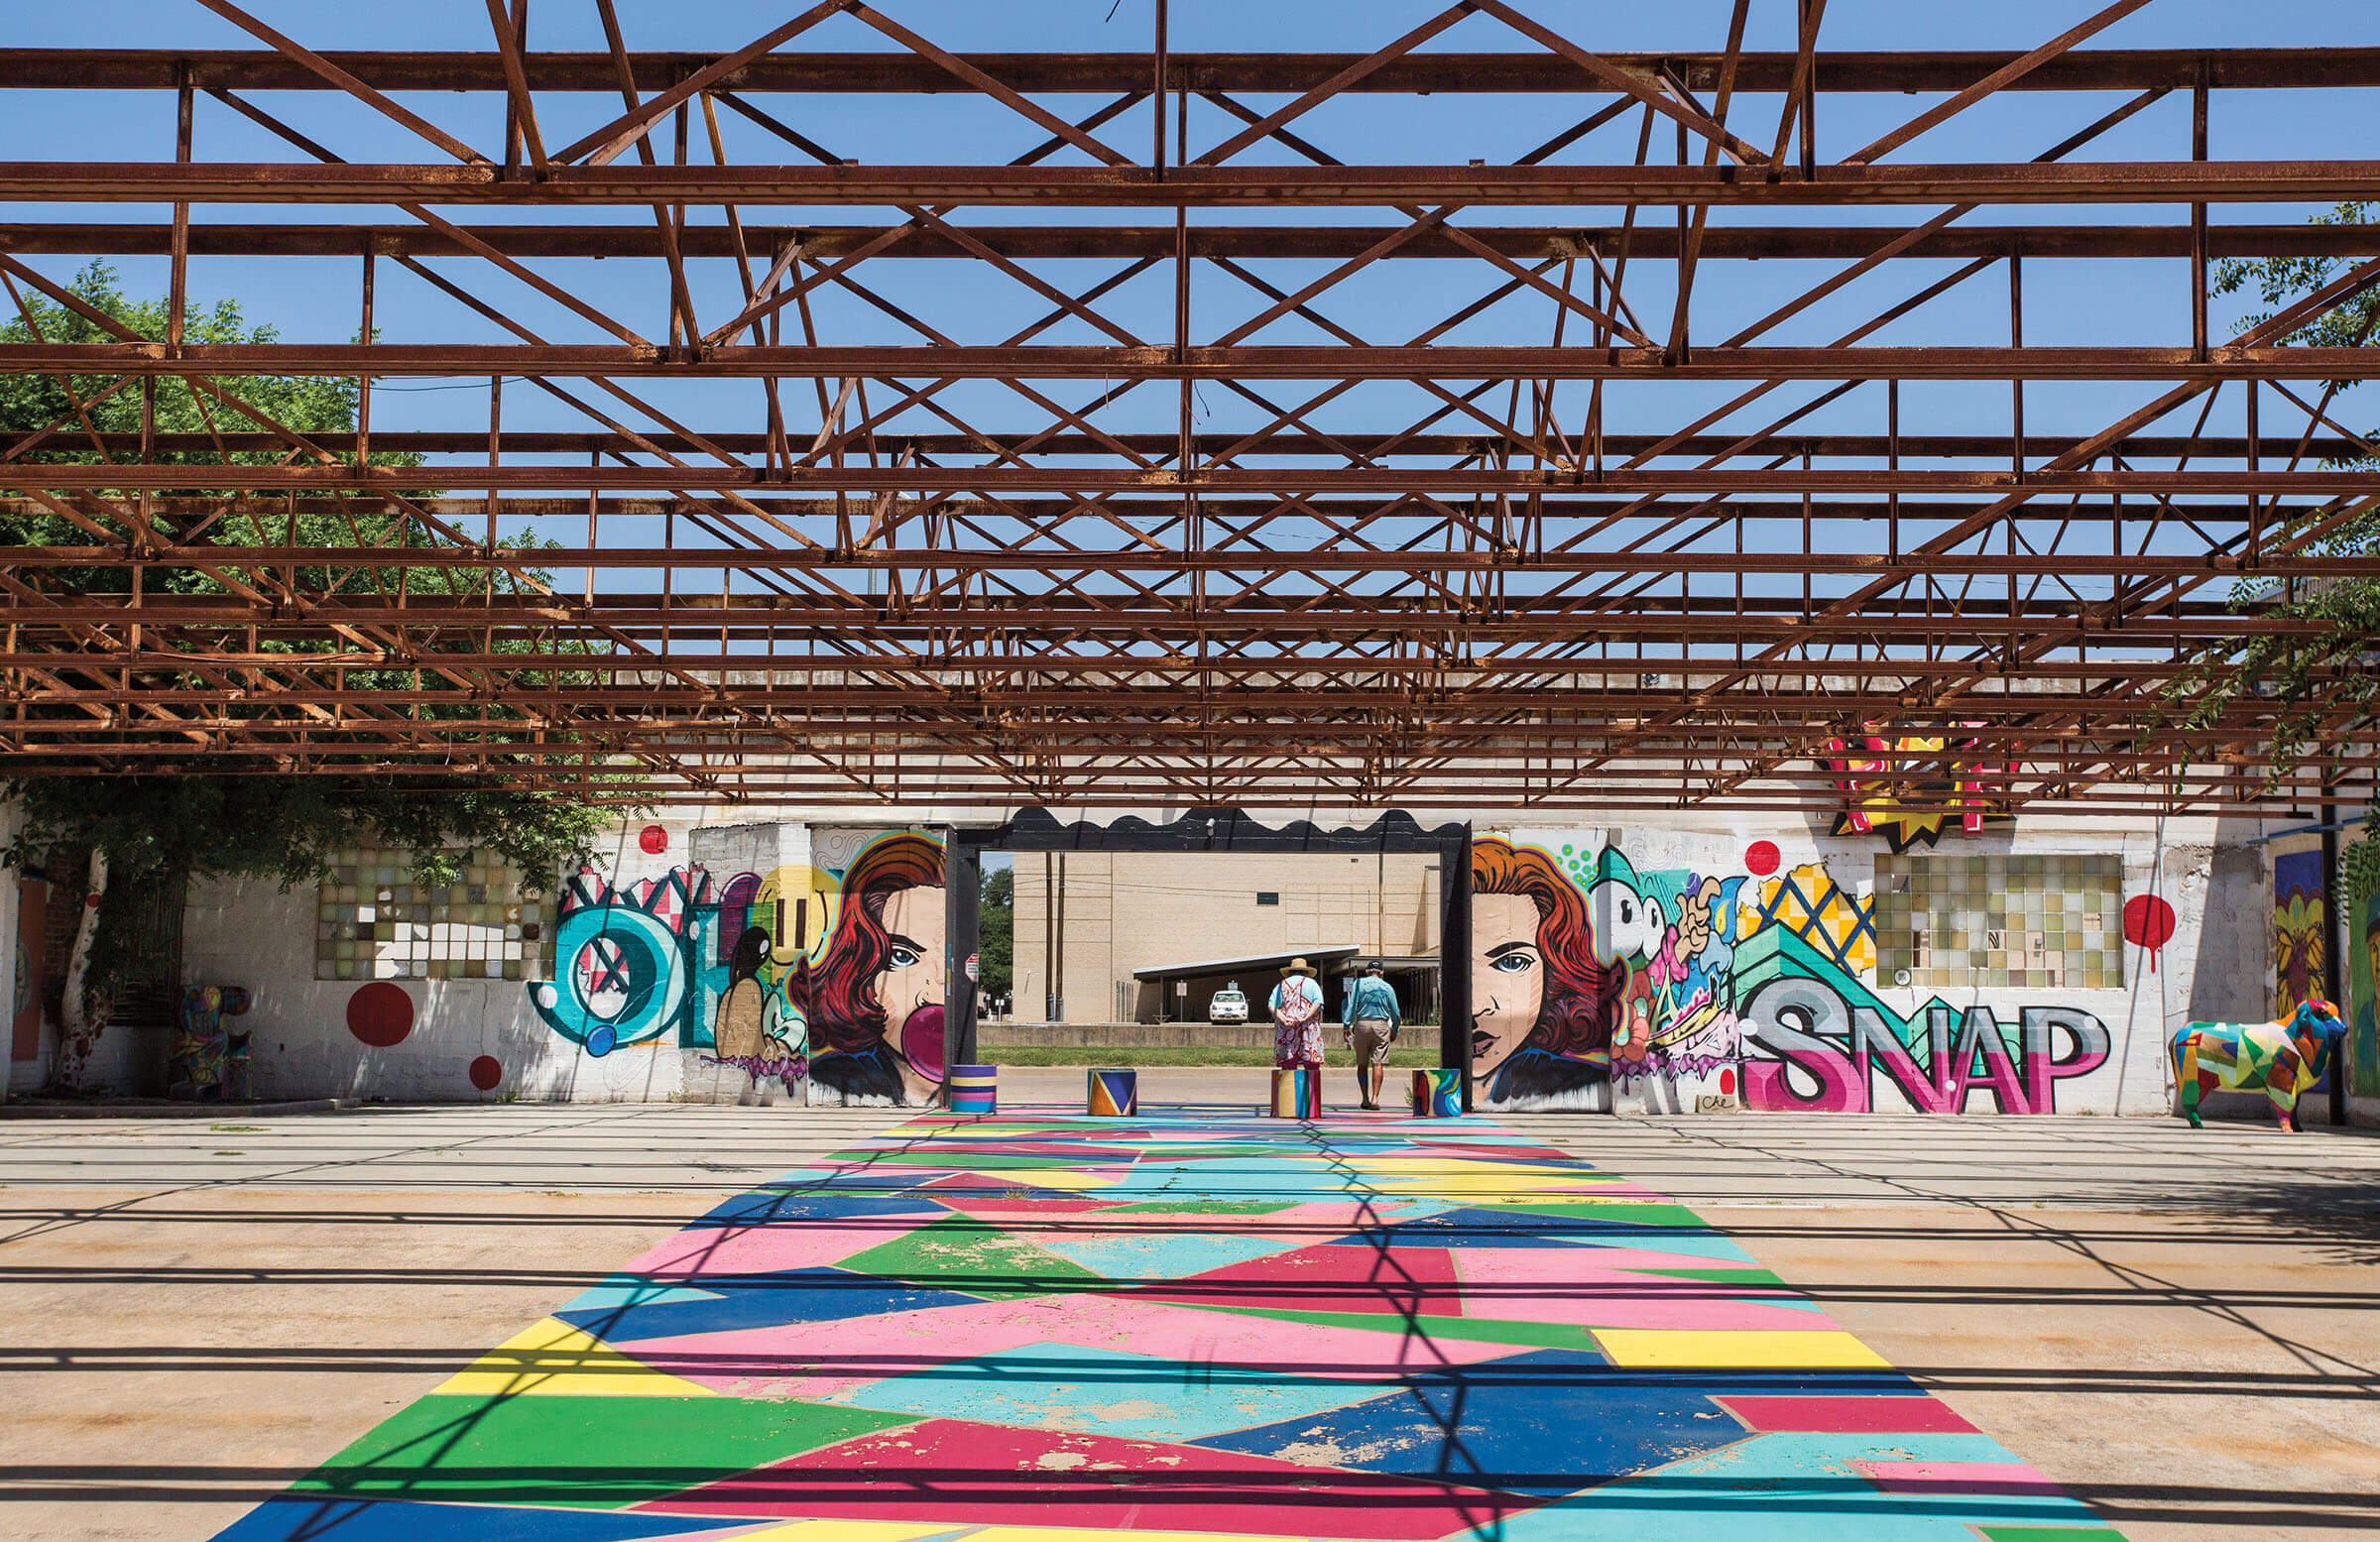 A brightly-colored mural and painted concerete floor underneath rusted, open-air rafters